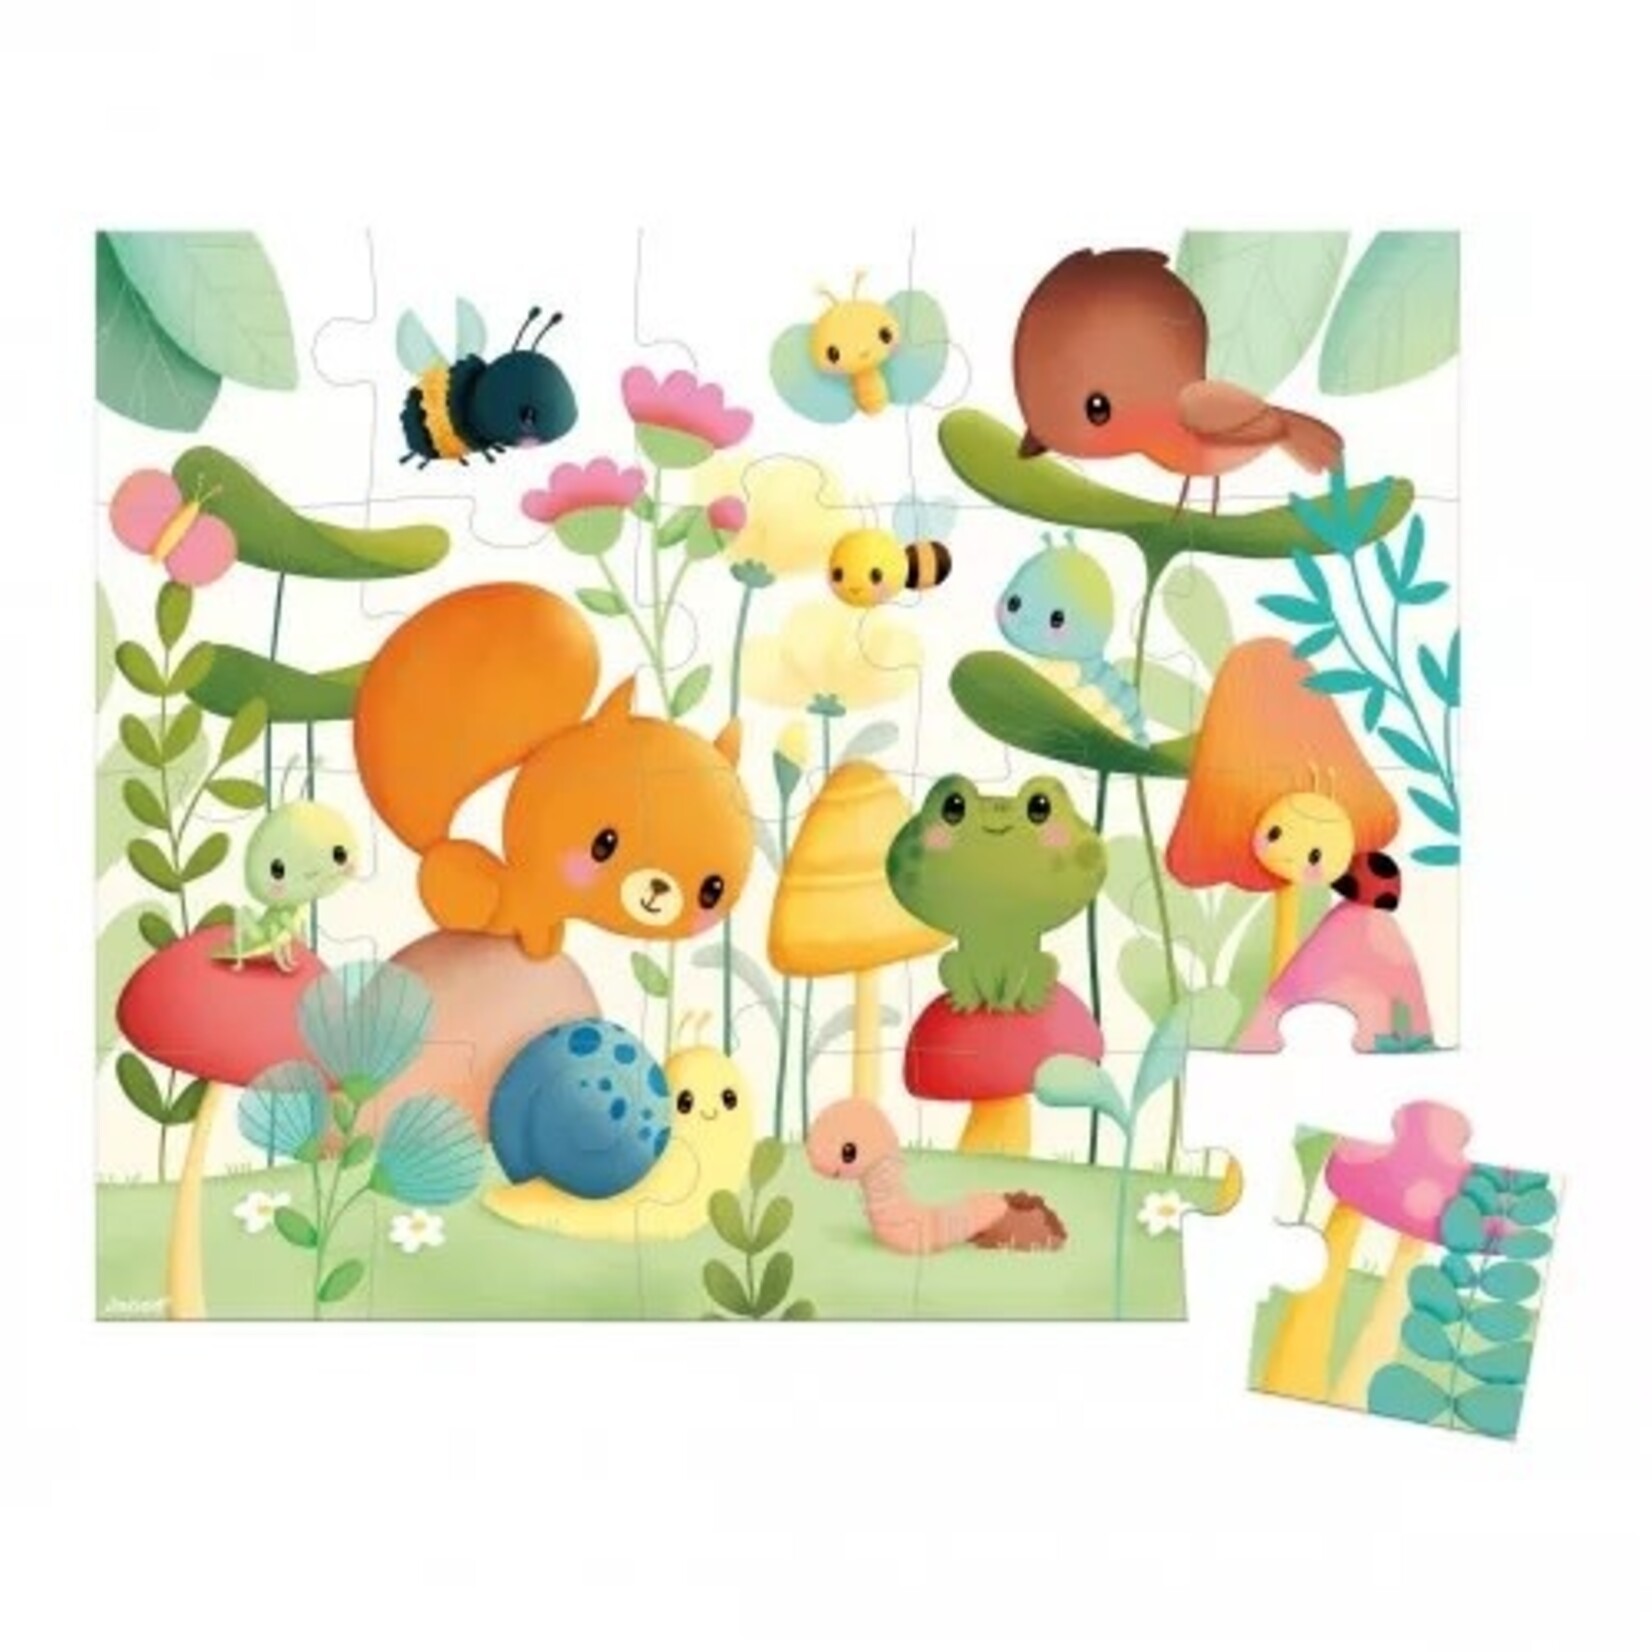 Janod JANOD - Observation puzzle with case - Garden friends - 20 pieces